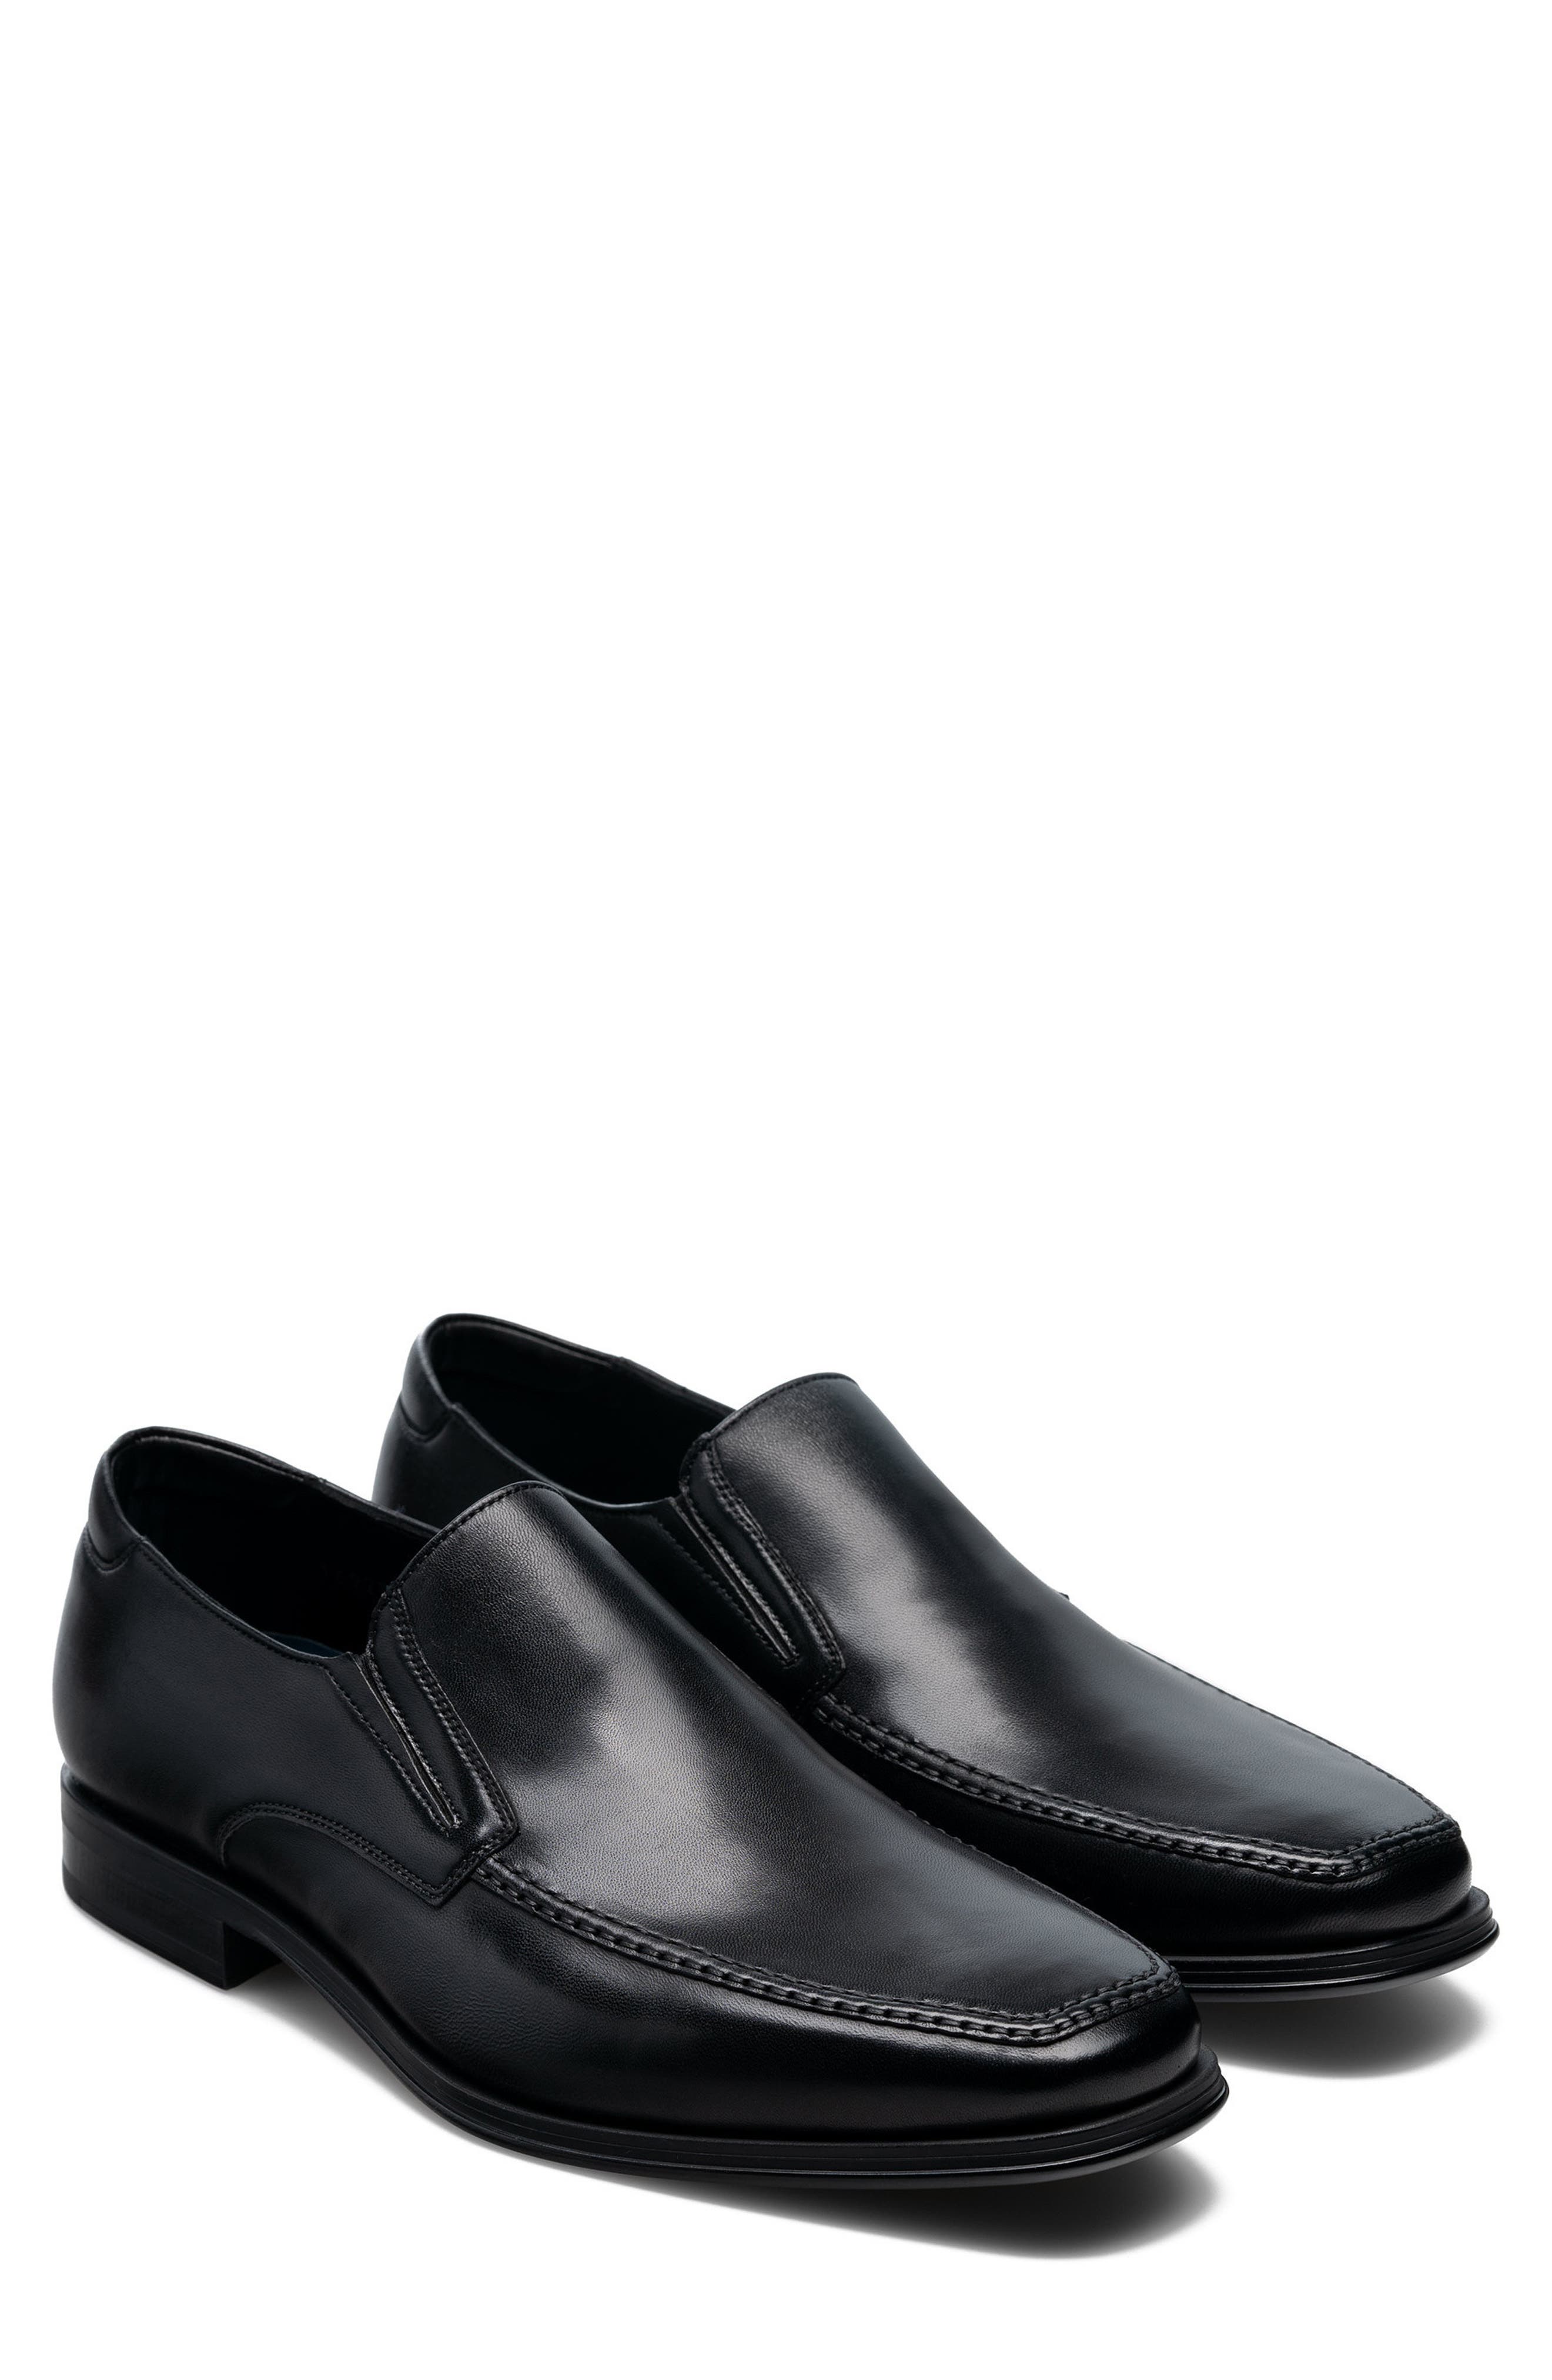 Shoes Mens Shoes Loafers & Slip Ons Male shoe 